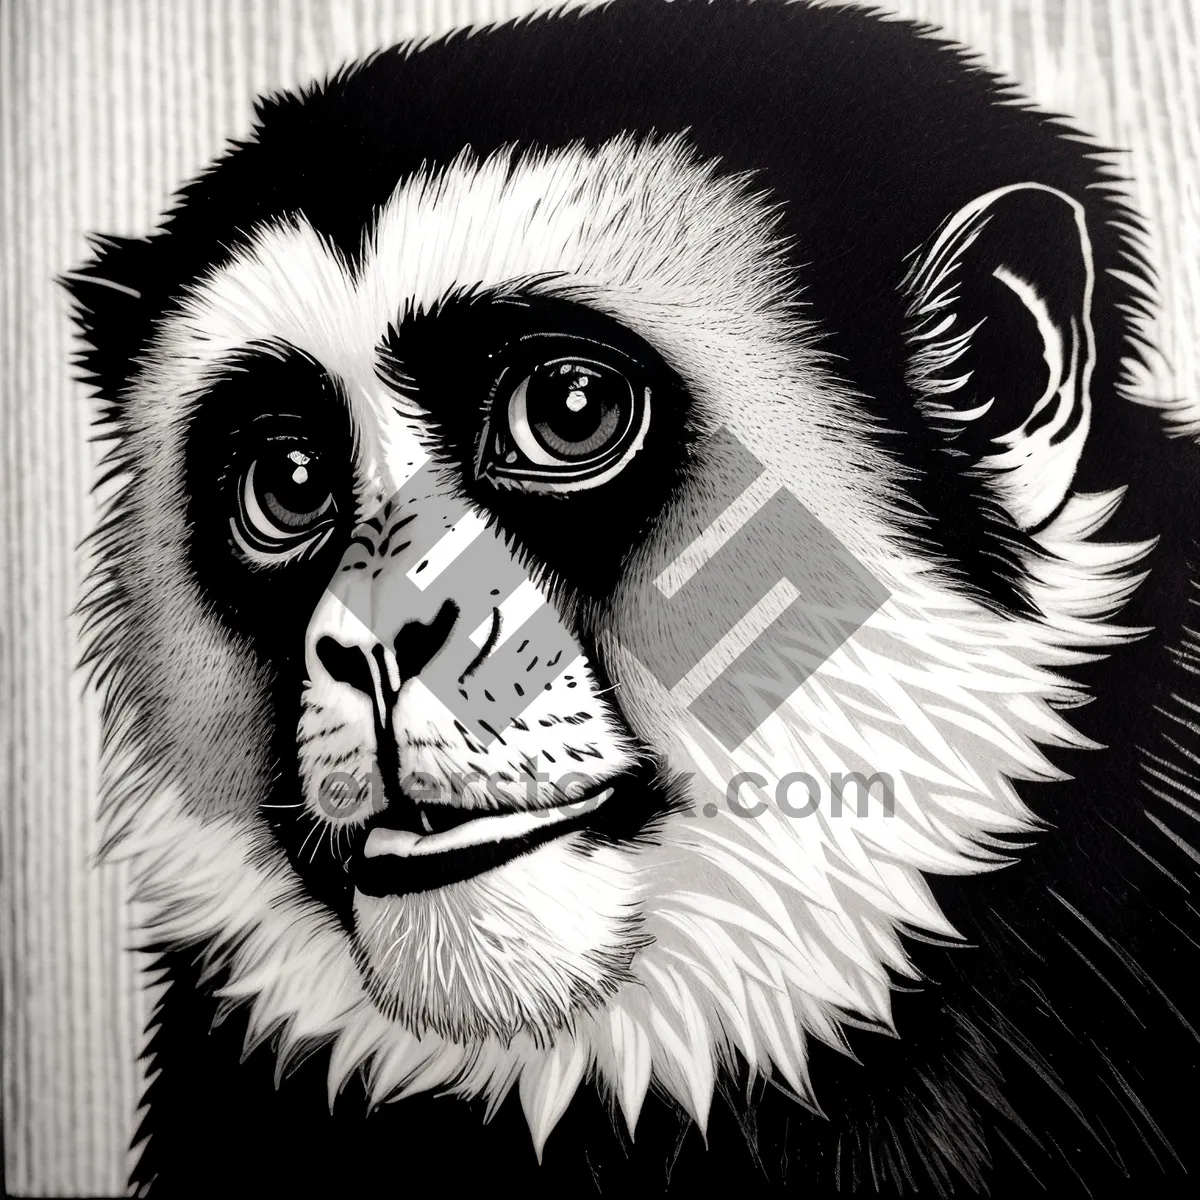 Picture of Wild Black Primate Monkey - Captivating Mammal Wildlife Face